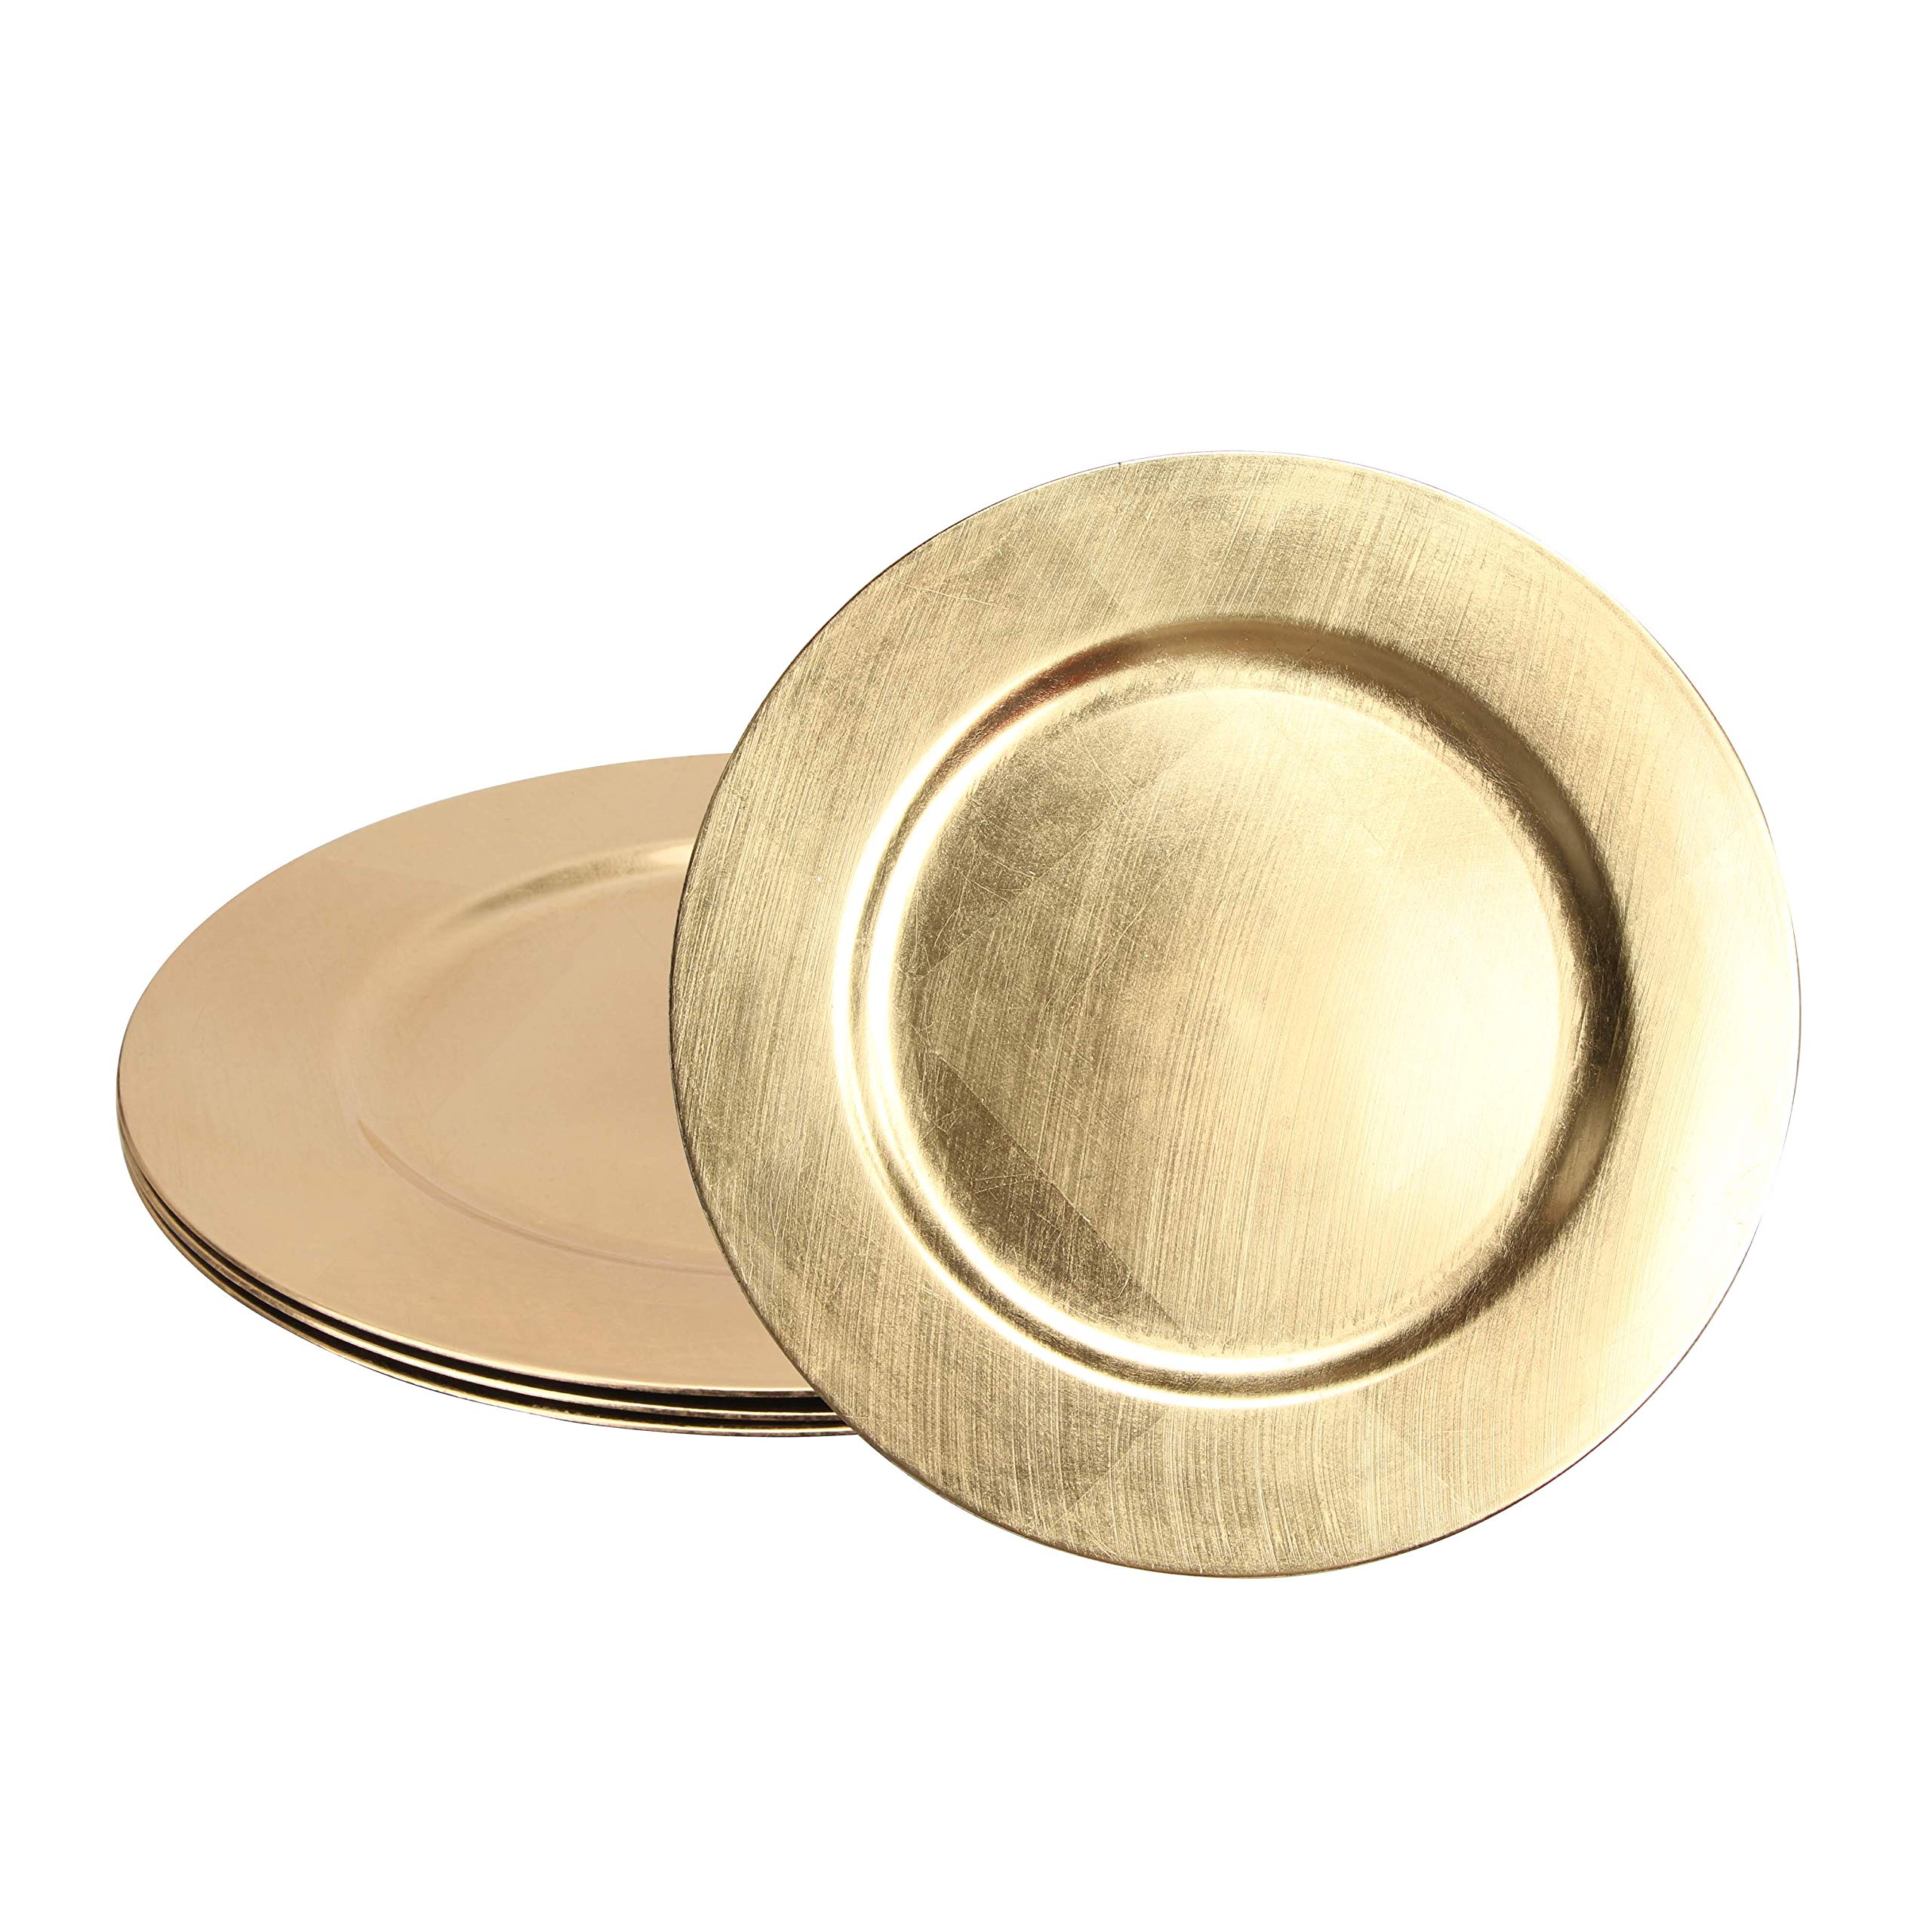 USA Party Flower 13 Inch Elegant Hand Brushed Finish Plastic Charger Plate Set of 12 (Gold)